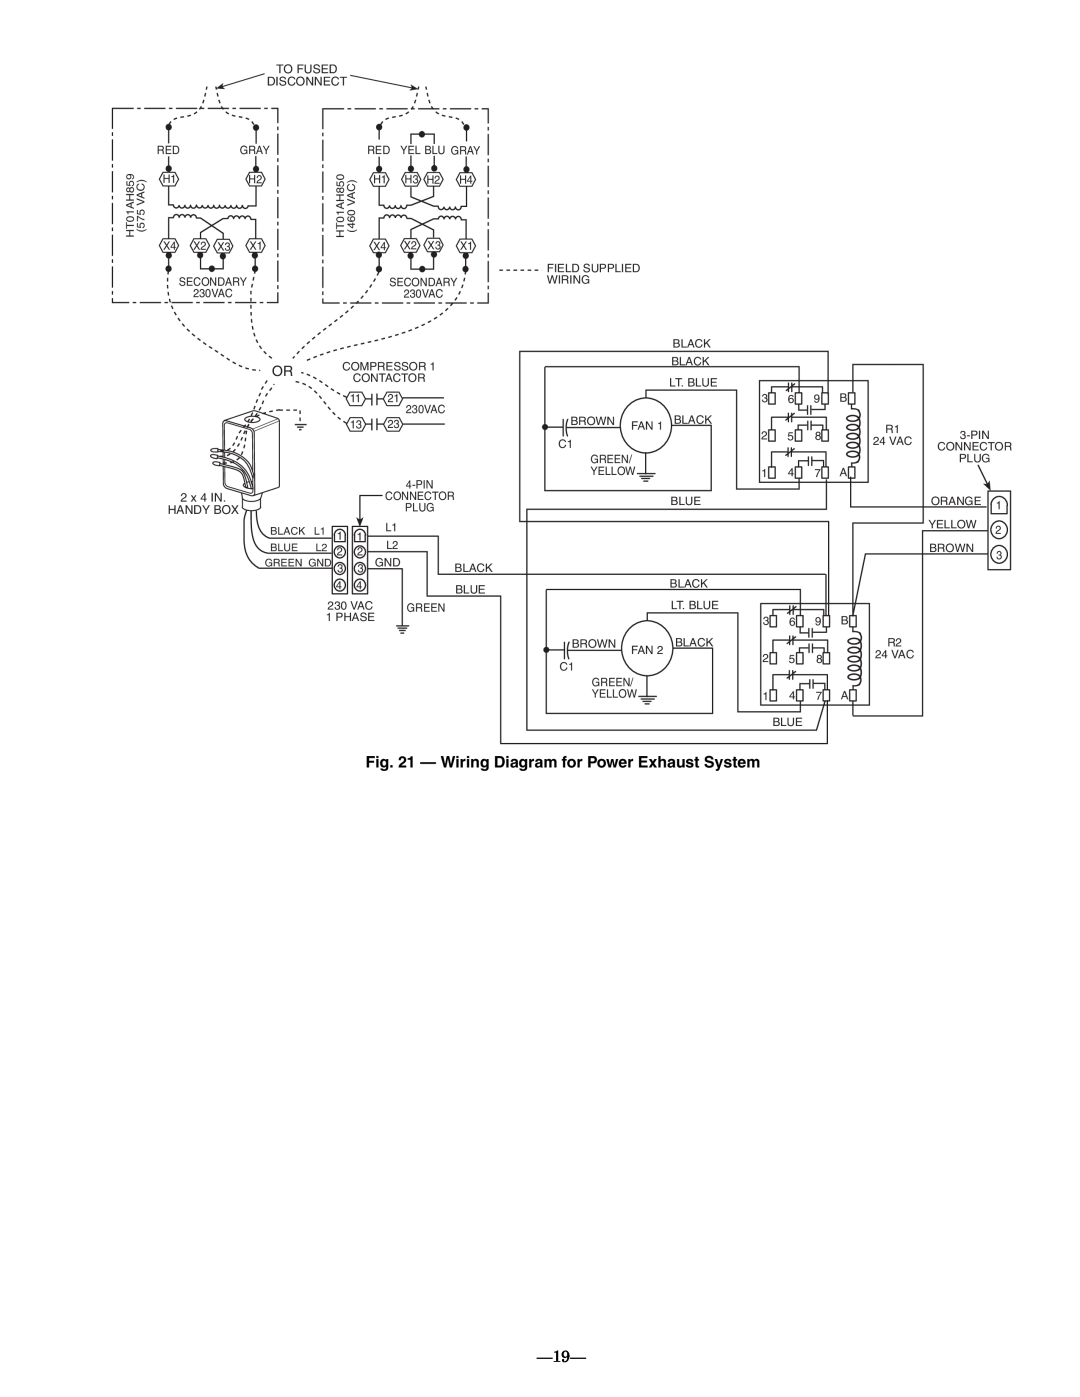 Bryant 558F.36.1 manual Wiring Diagram for Power Exhaust System 